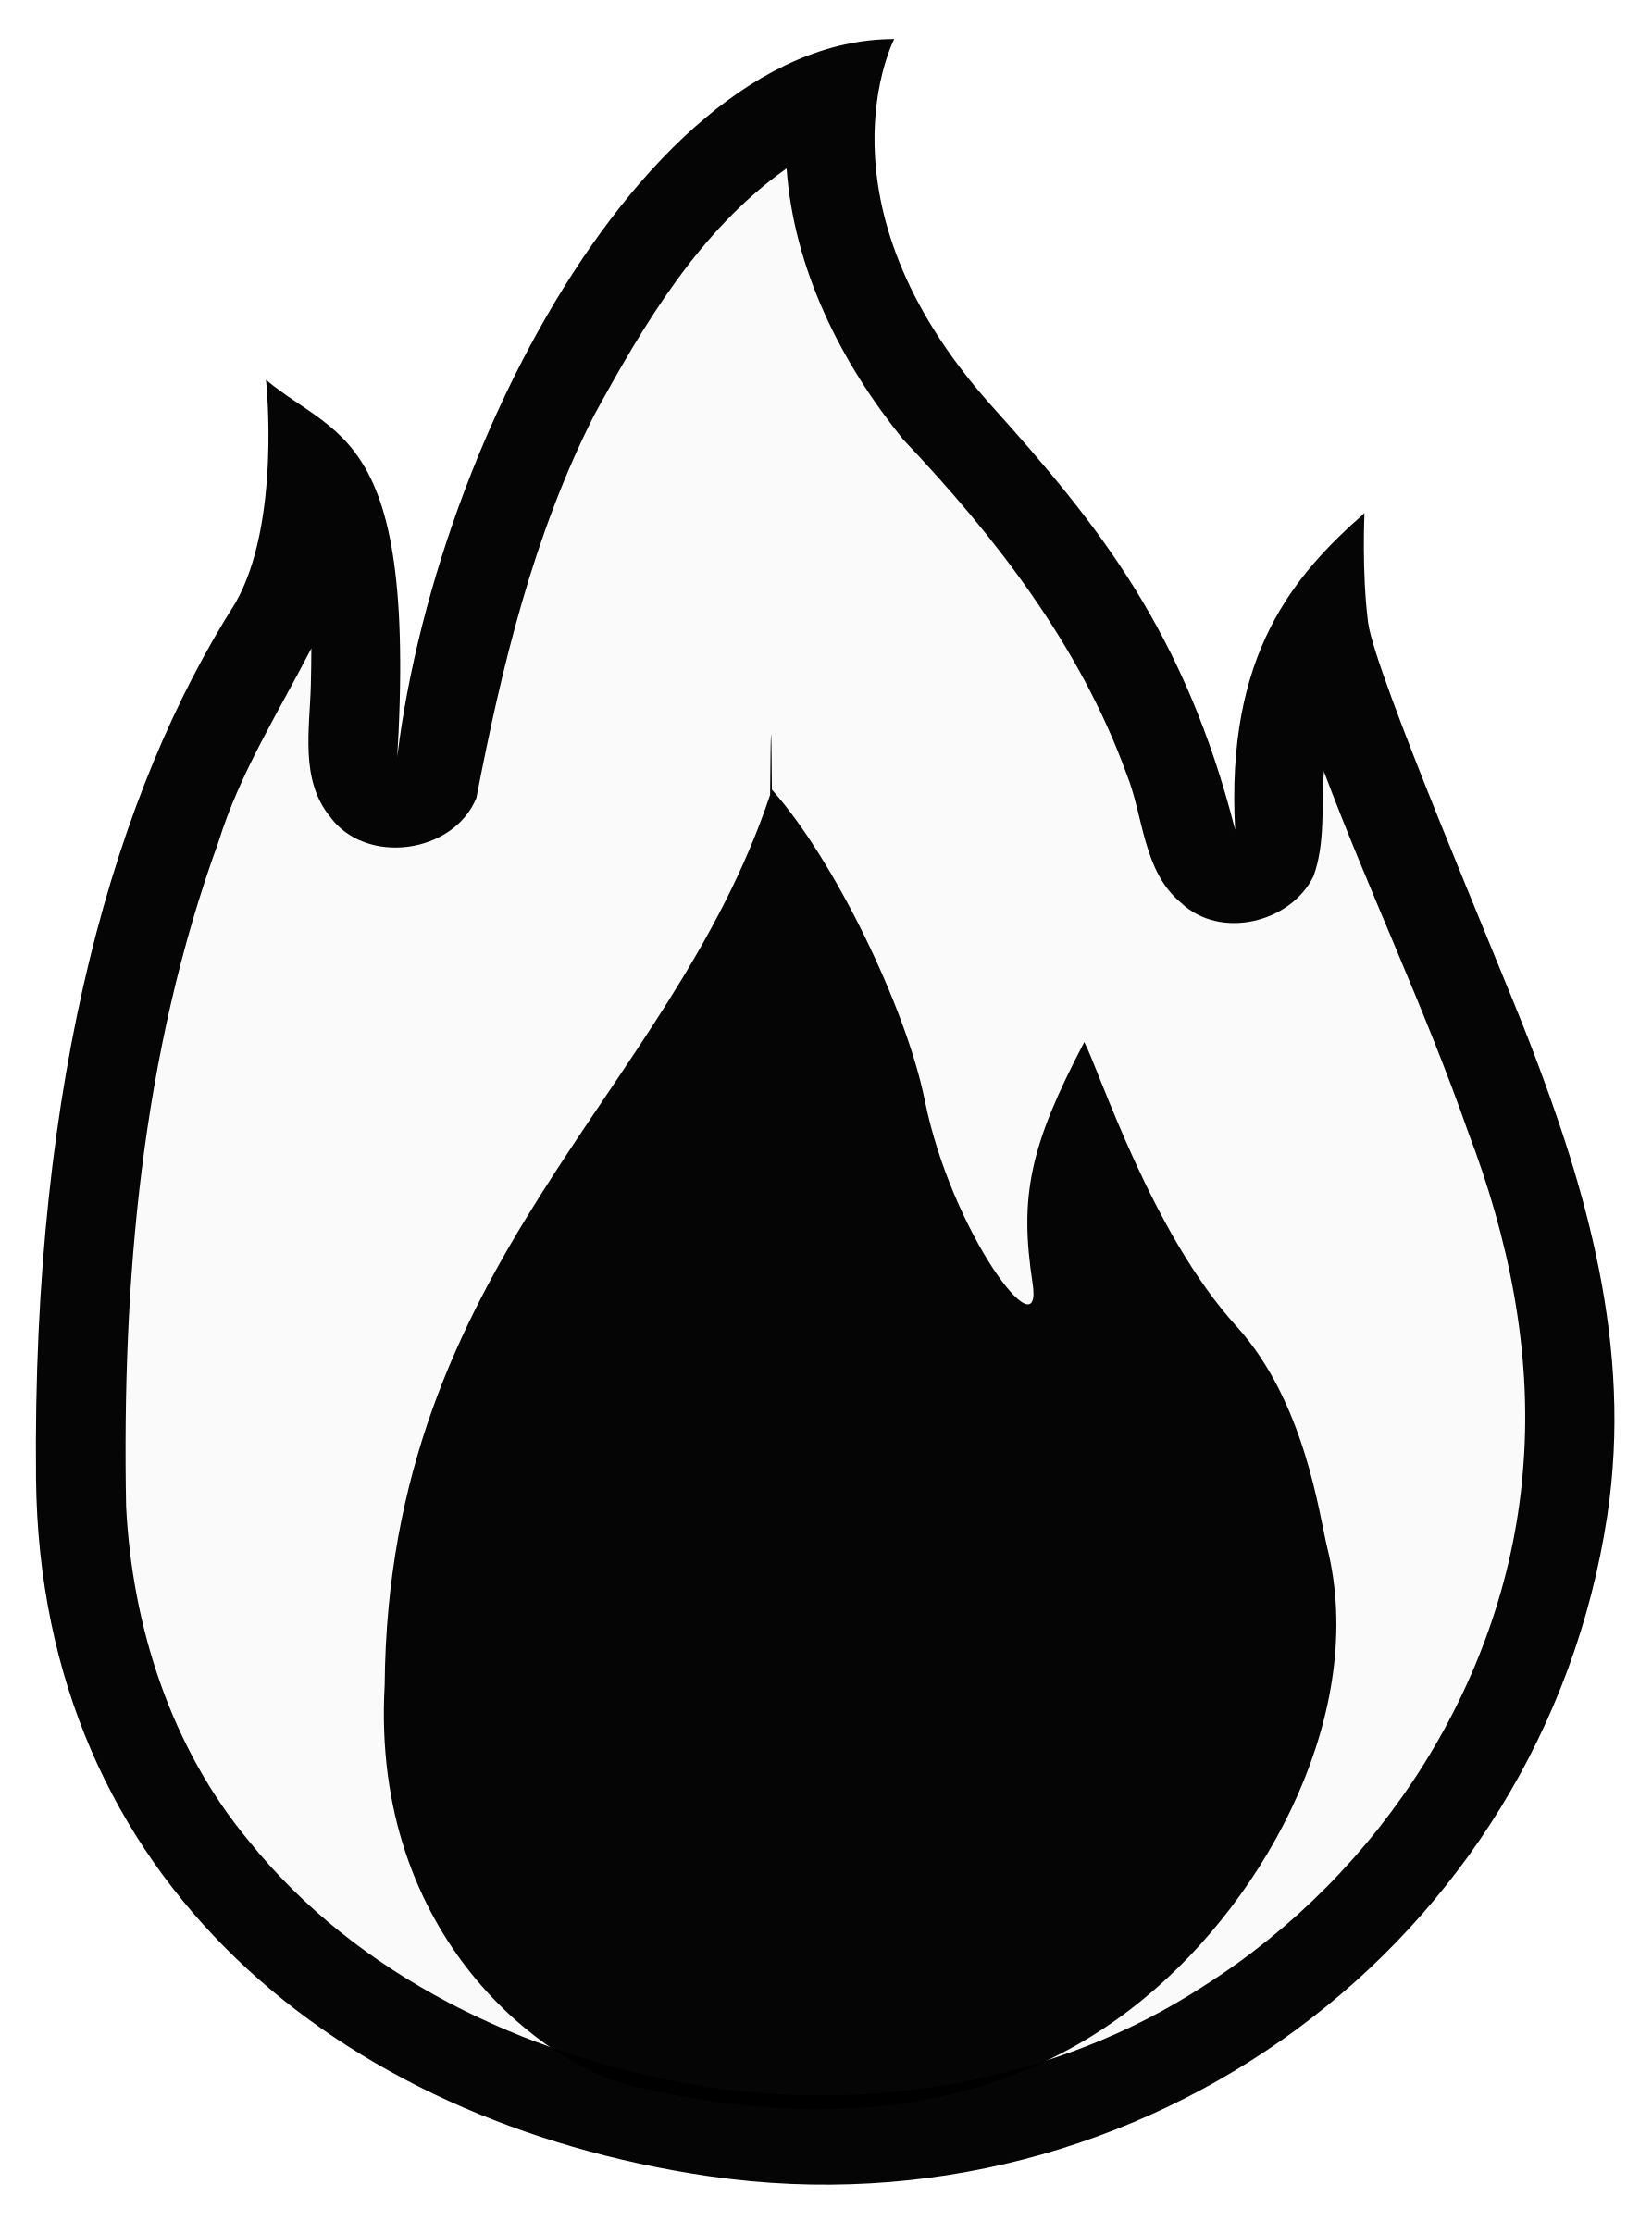 Monochrome flame clipart. Graphic by uroesch.